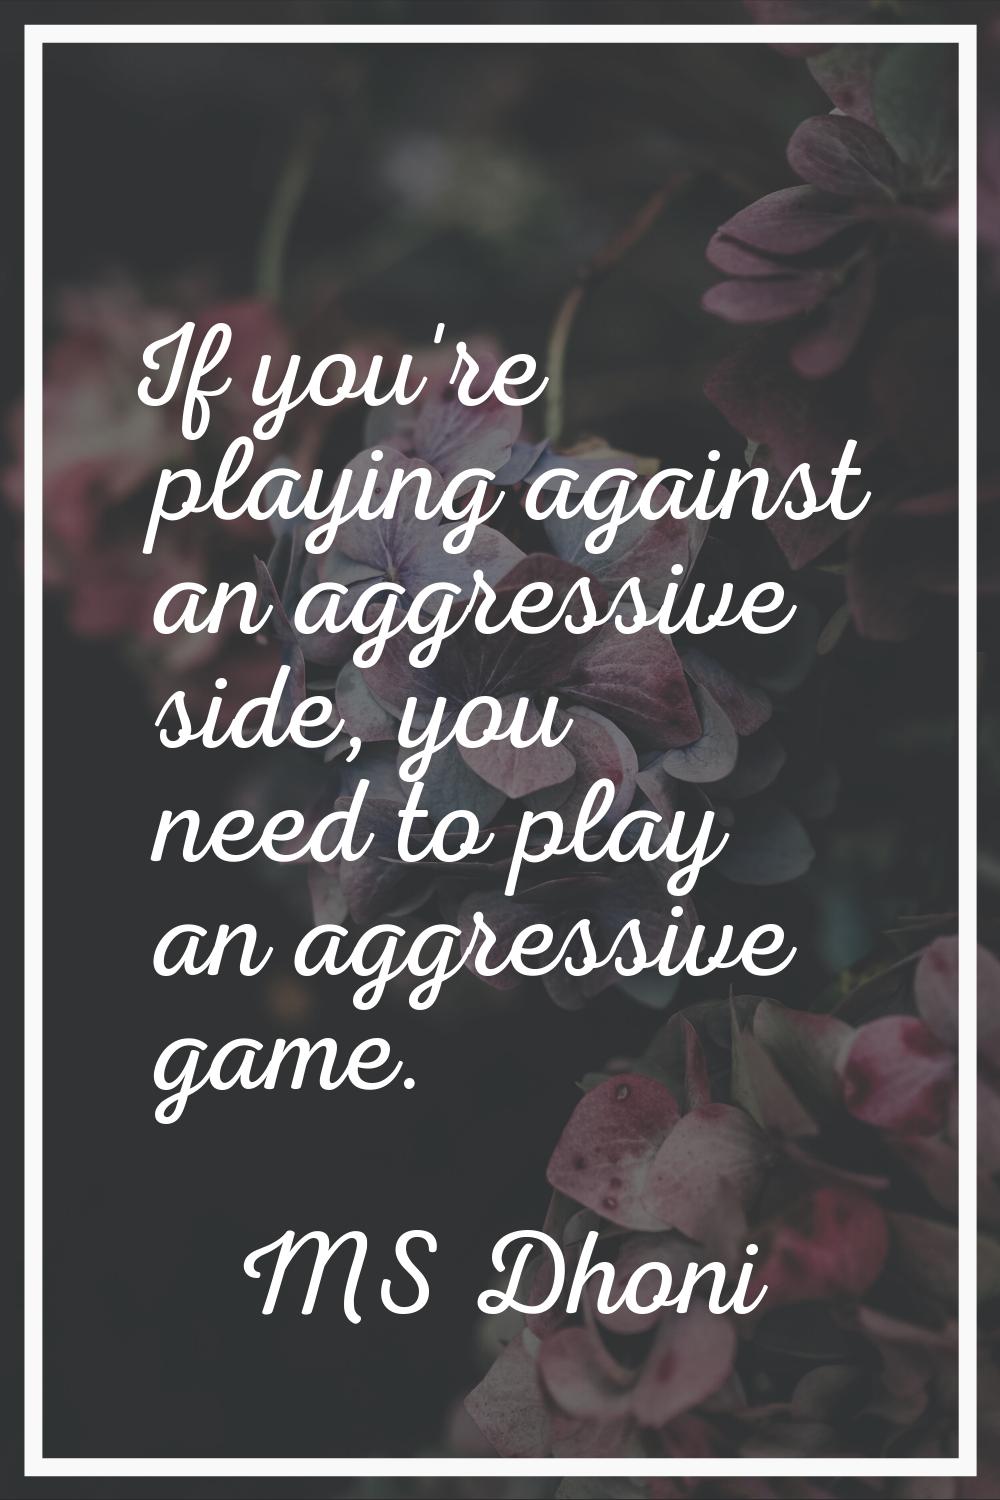 If you're playing against an aggressive side, you need to play an aggressive game.